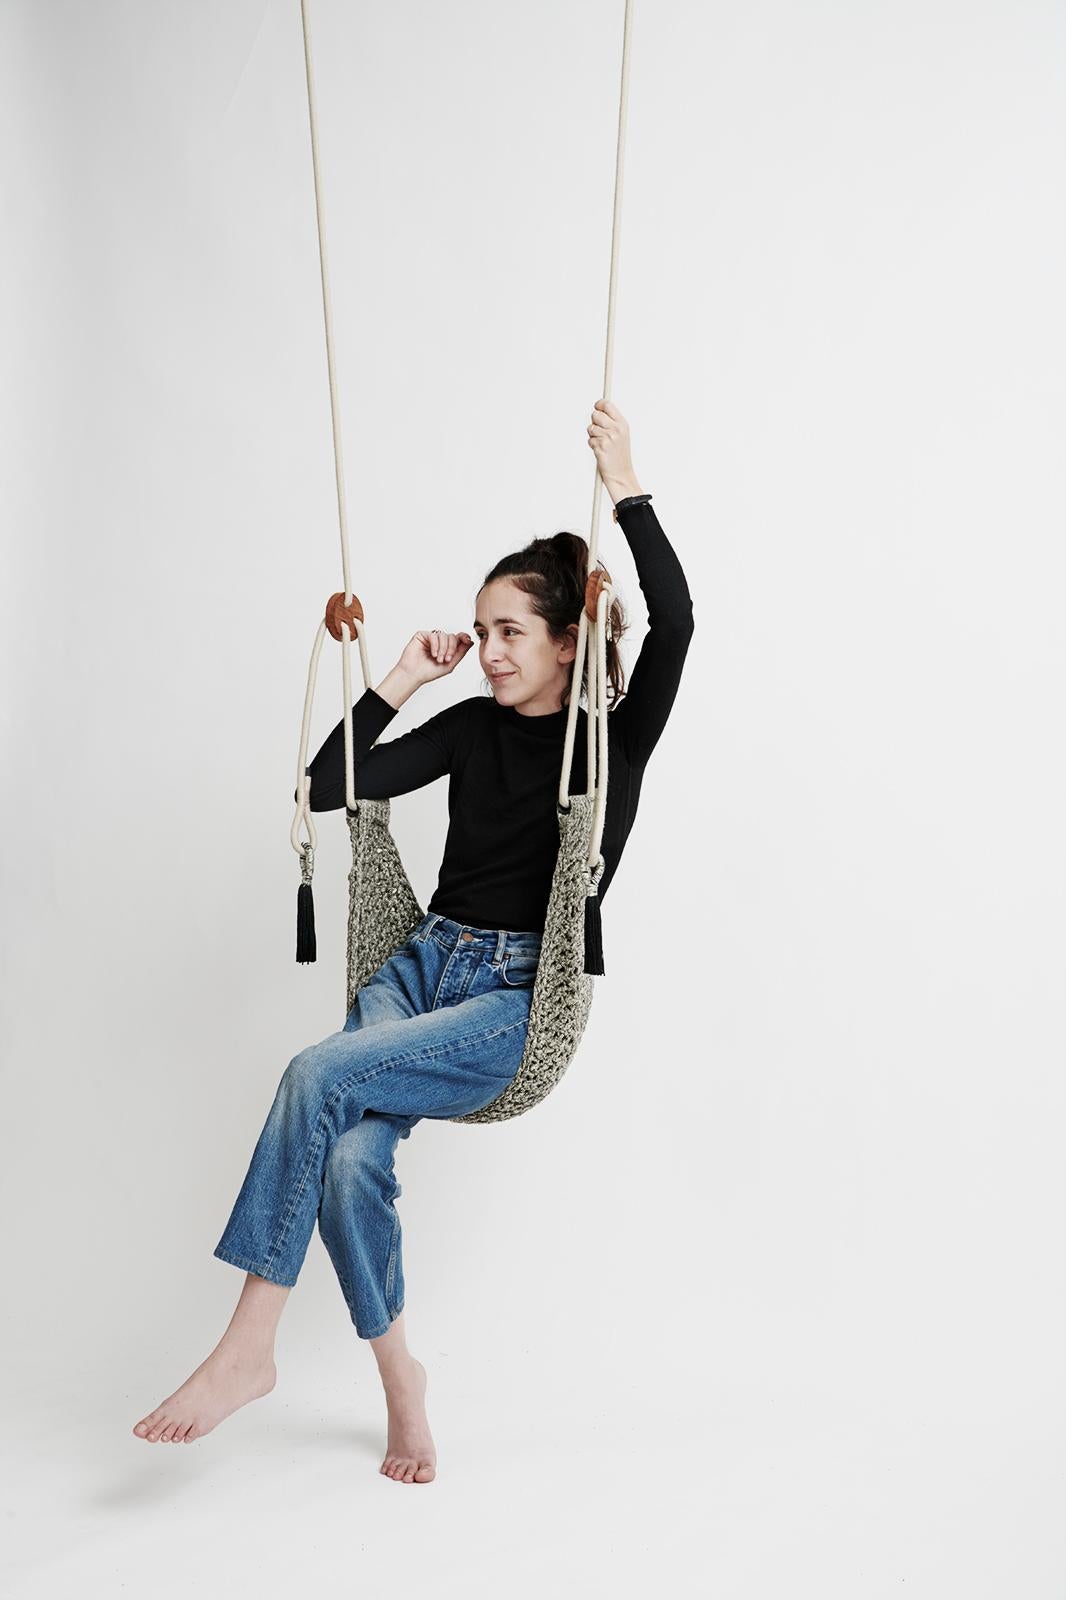 The IOTA Saddle Swings are lightweight and compact. They are good for enjoying the outdoors and kids love them too. You can easily take the hammock like swing with you to hang during camping trips. The swings are handmade from a signature yarn